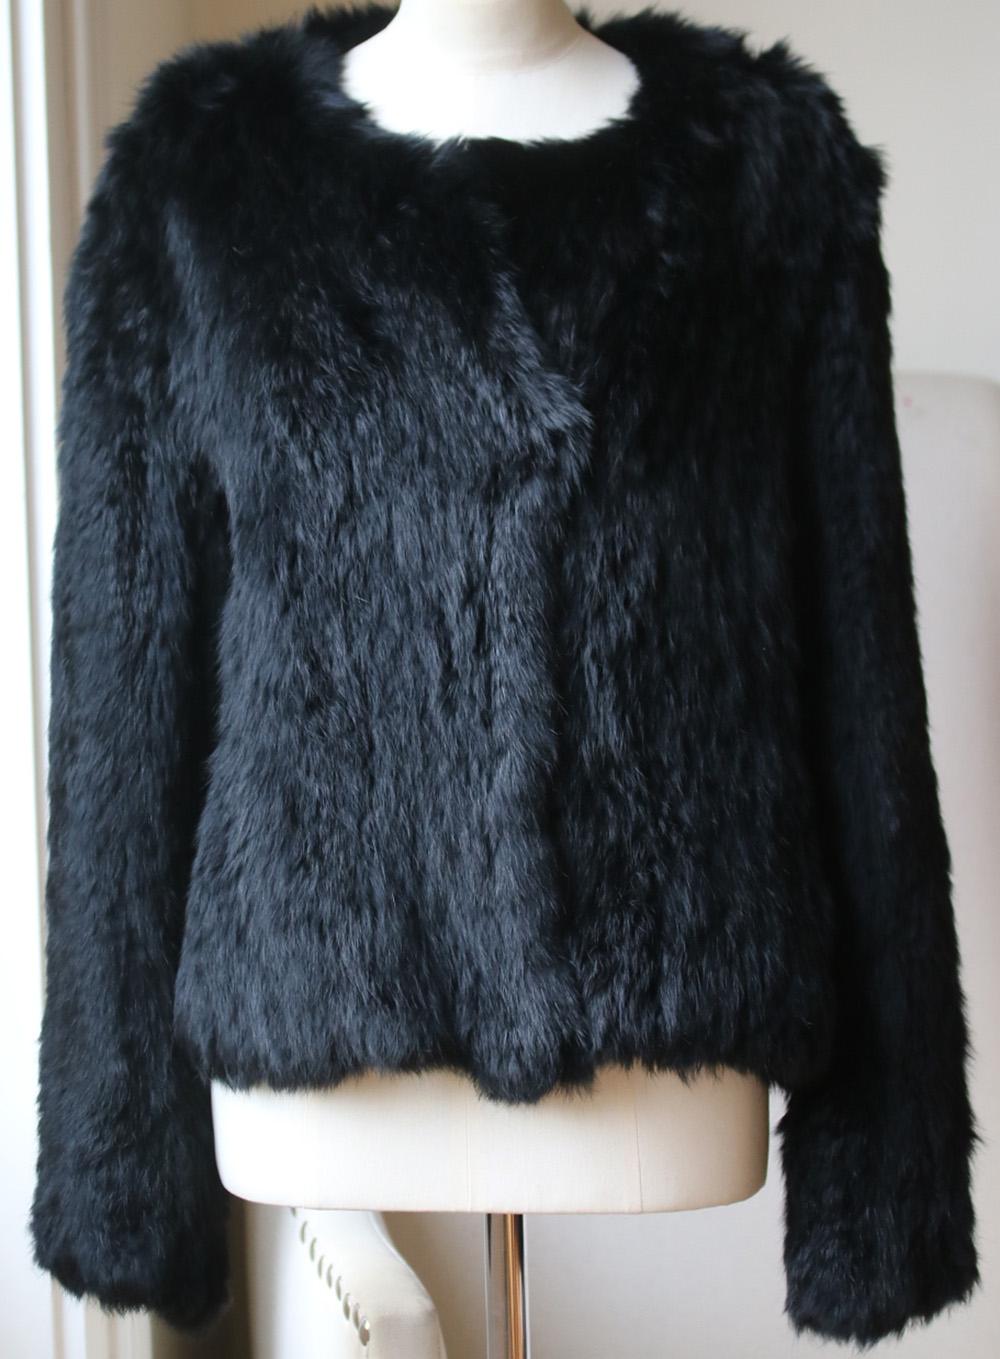 Yves Salomon – Meteo's finely knitted rabbit fur jacket is sublimely luxurious. The short, lightweight style comes in a deep, luxe black and boasts traditional glamour. Hook fastening. 100% Rabbit fur. Designer colour name: Noir. 

Size: FR 38 (UK